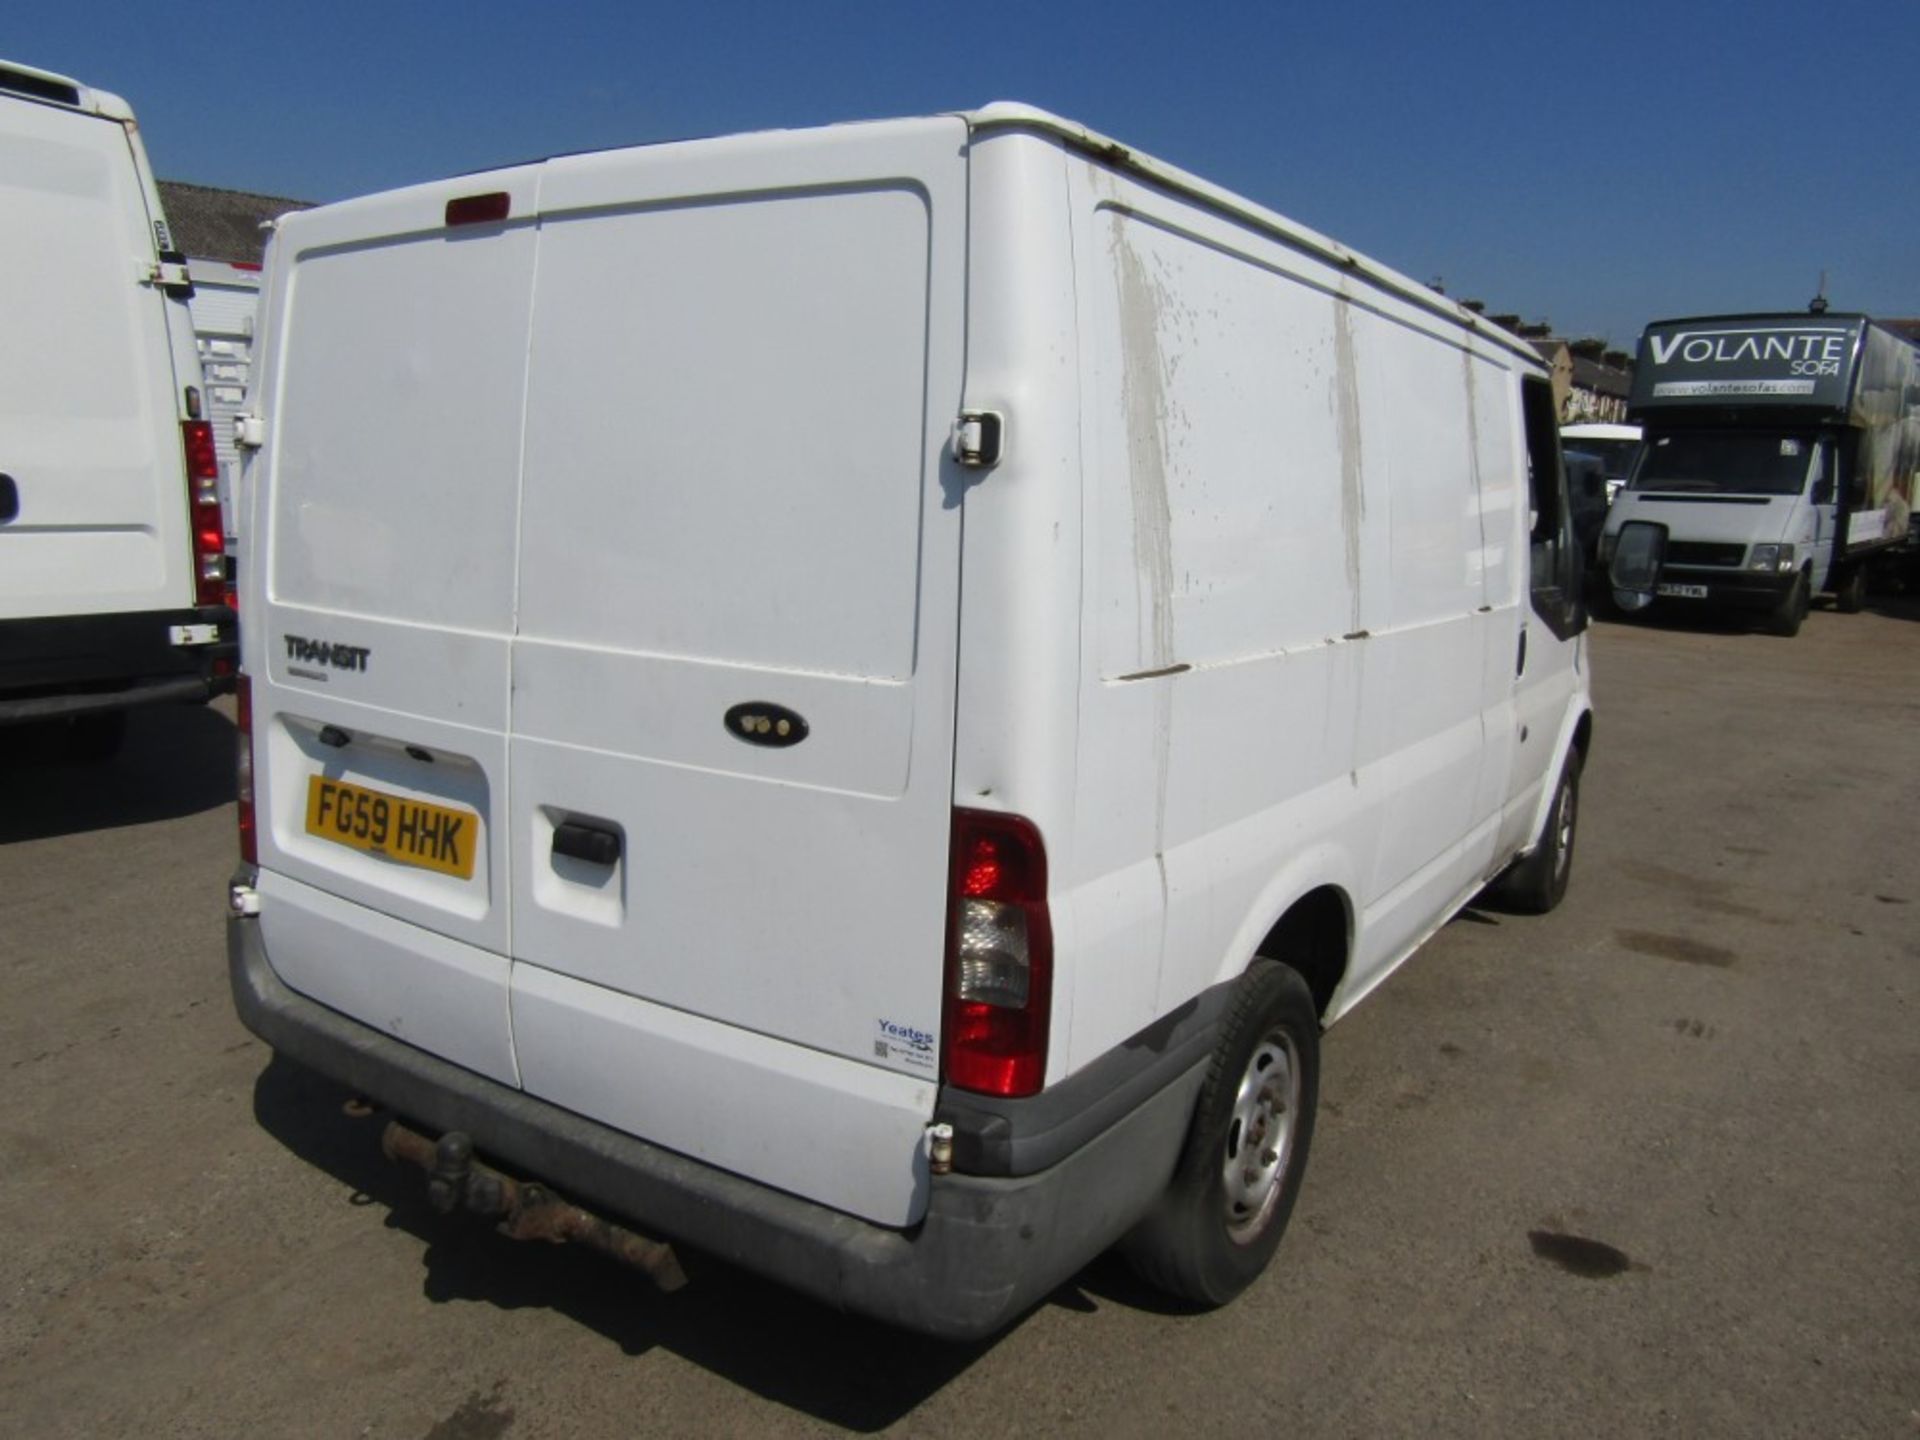 59 reg FORD TRANSIT 85 T260M FWD, 1ST REG 11/09, TEST 12/22, 162693M V5 HERE, 7 FORMER KEEPERS [NO - Image 4 of 7